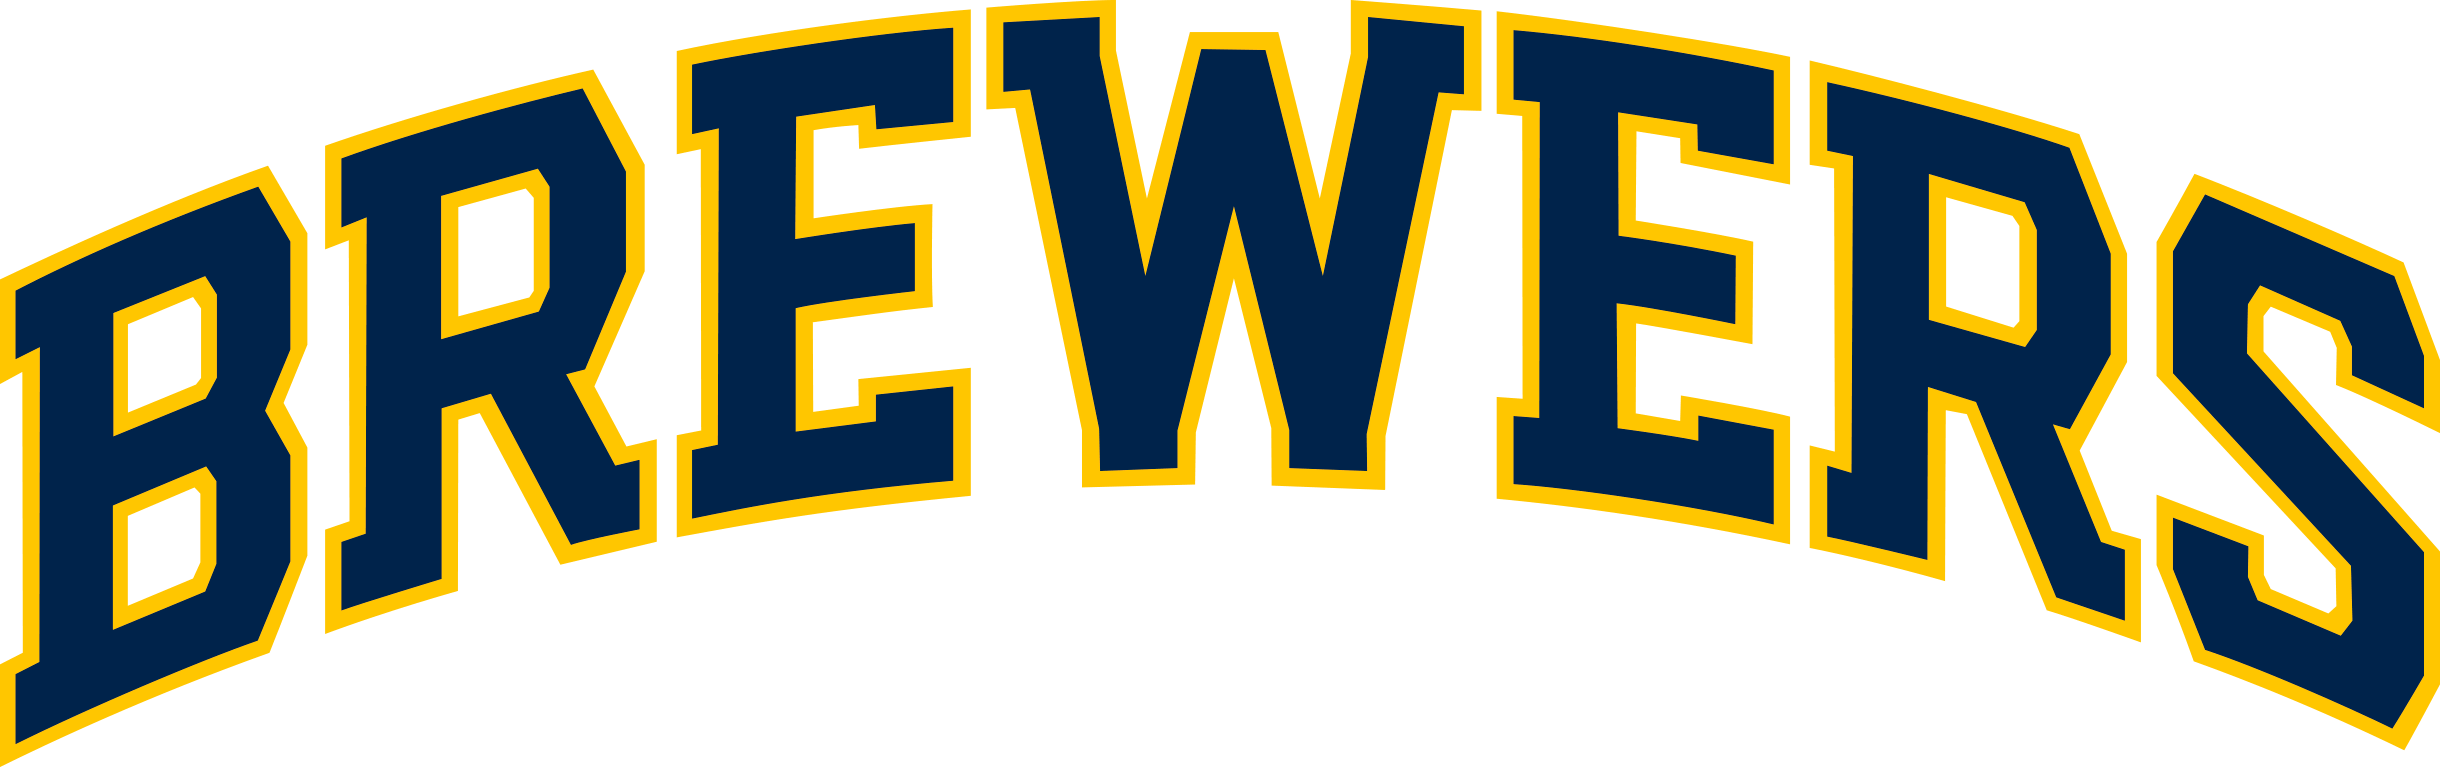 MLB Milwaukee Brewers SVG, SVG Files For Silhouette, Milwaukee Brewers Files  For Cricut, Milwaukee Brewers SVG, DXF, EPS, PNG Instant Download. Milwaukee  Brewers SVG, SVG Files For Silhouette, Milwaukee Brewers Files For